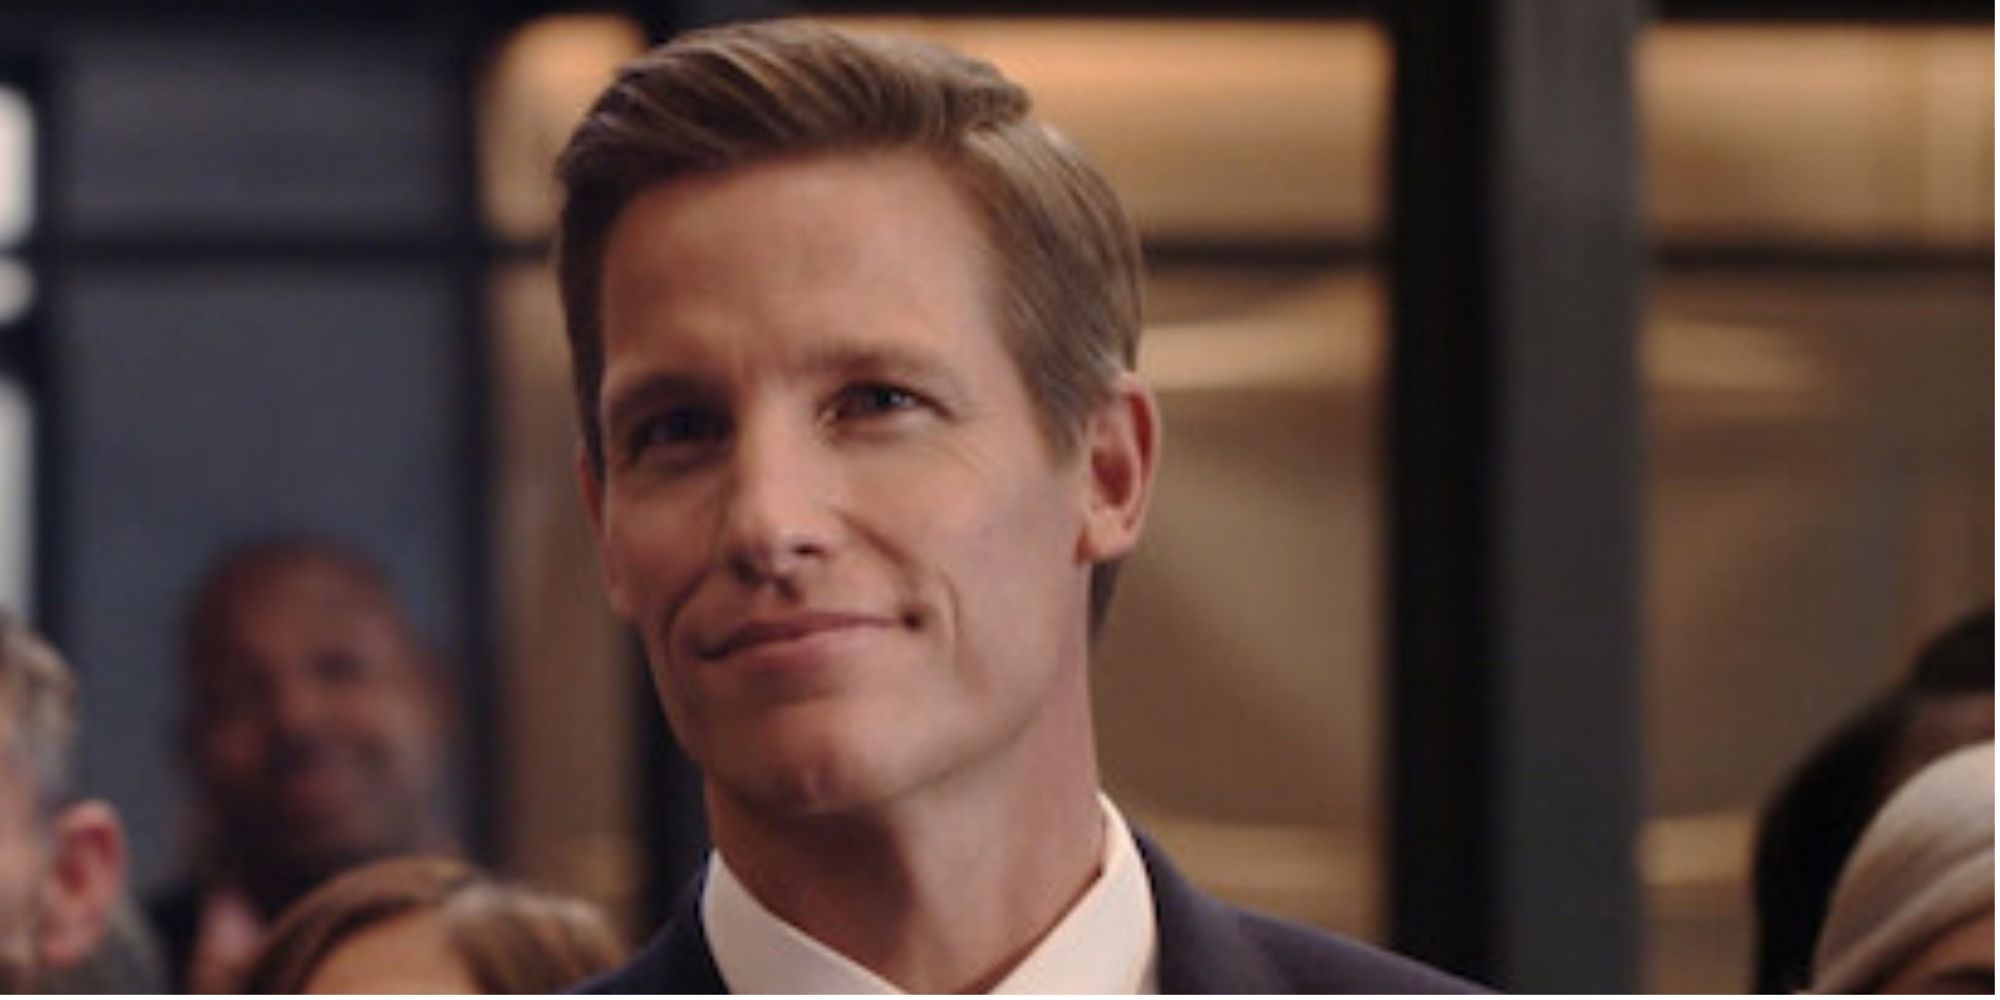 Image of Ward Horton as Nathan Eskol in Tom Swift at a banquet